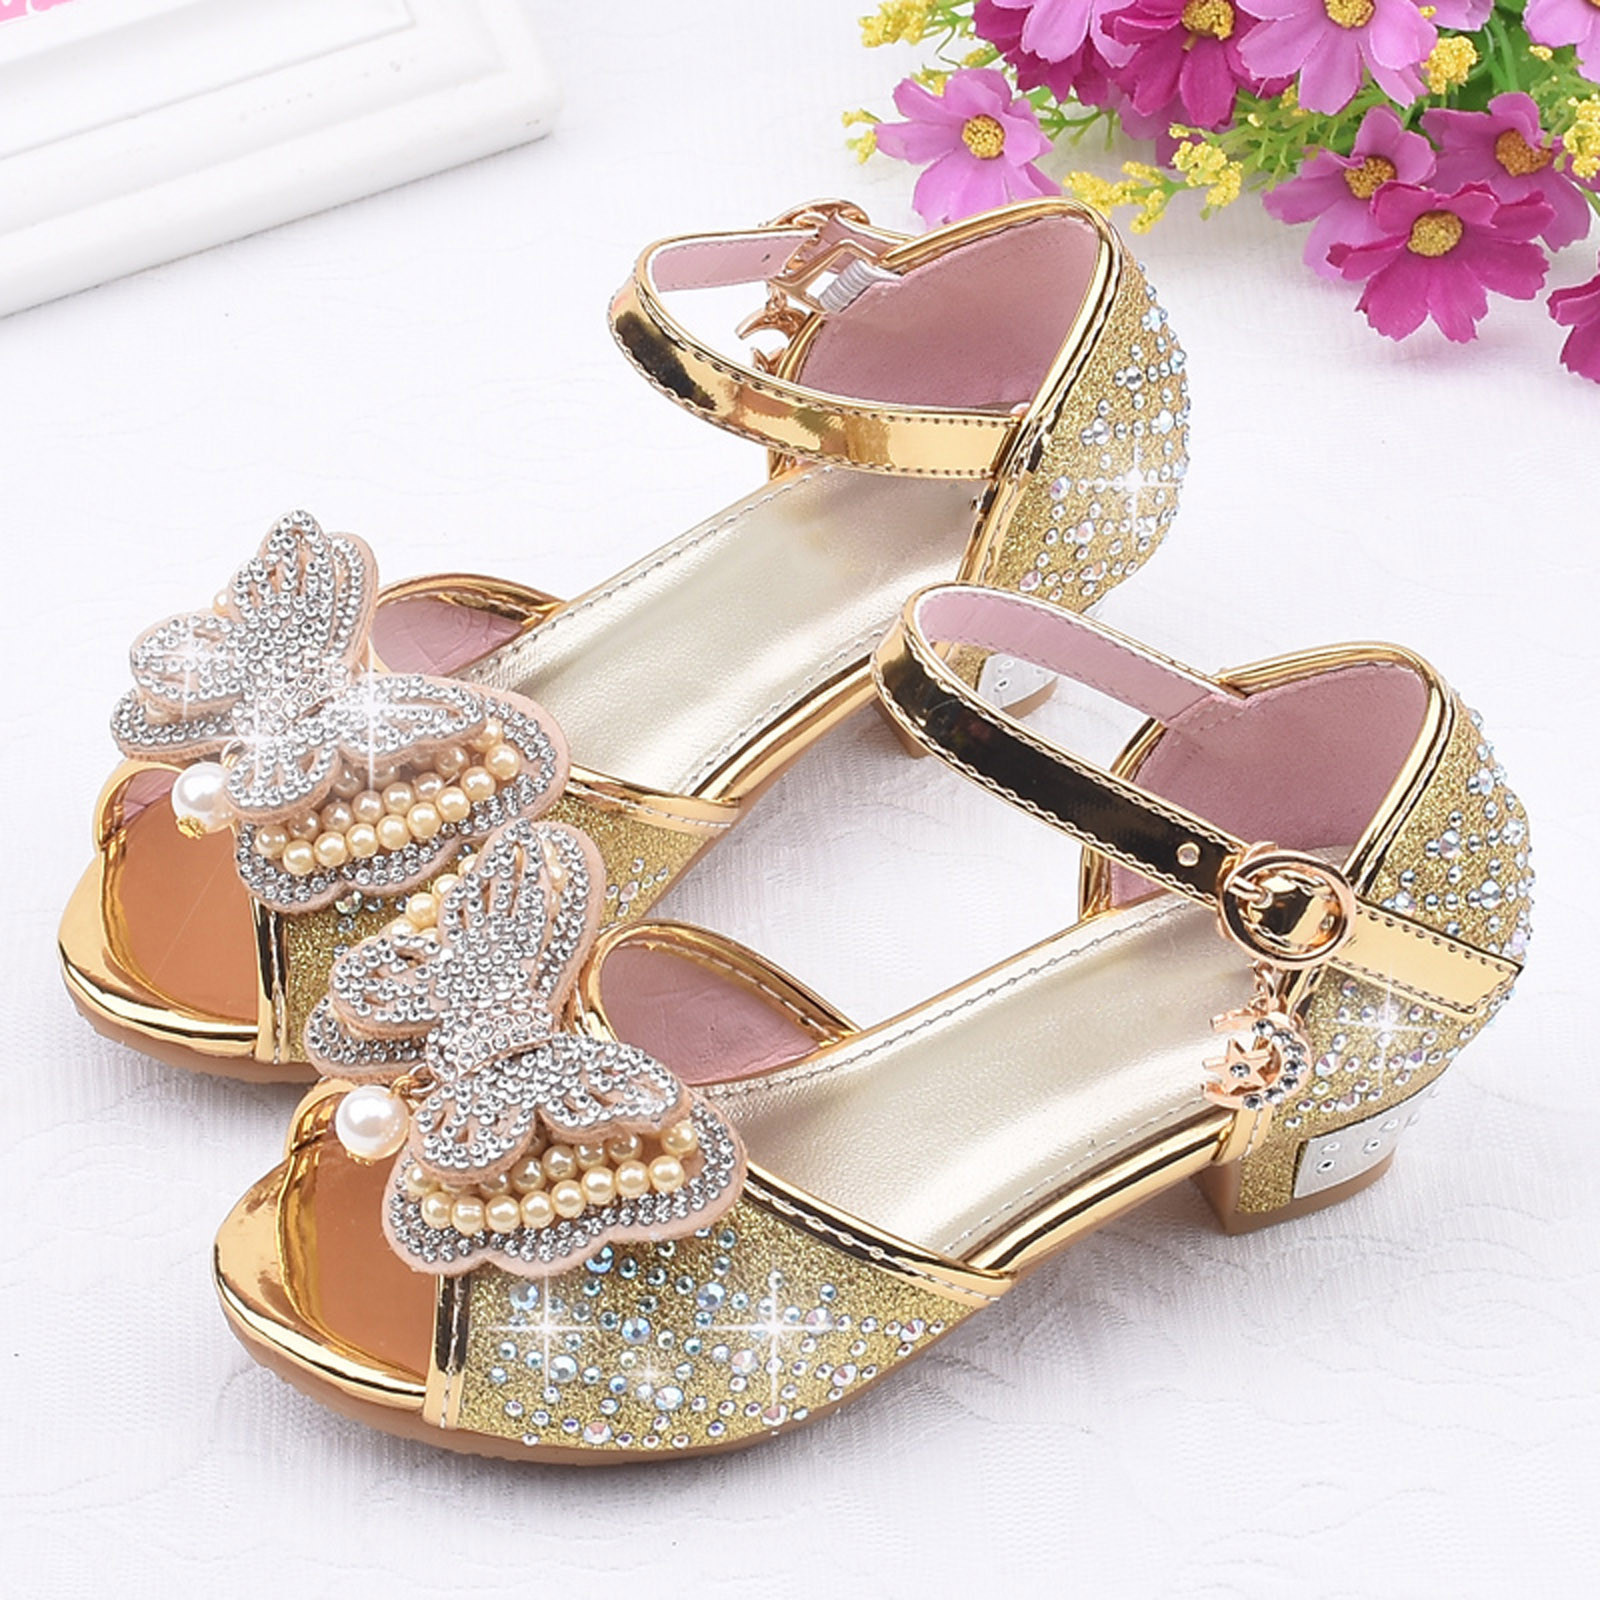 Penkiiy Children's Shoes Girls Fish Mouth Butterfly Pearl Rhinestone Crystal Princess Shoes Dance Shoes Cool Sandals for Kids 5-5.5 Years Gold 2023 Summer Deal - image 2 of 7